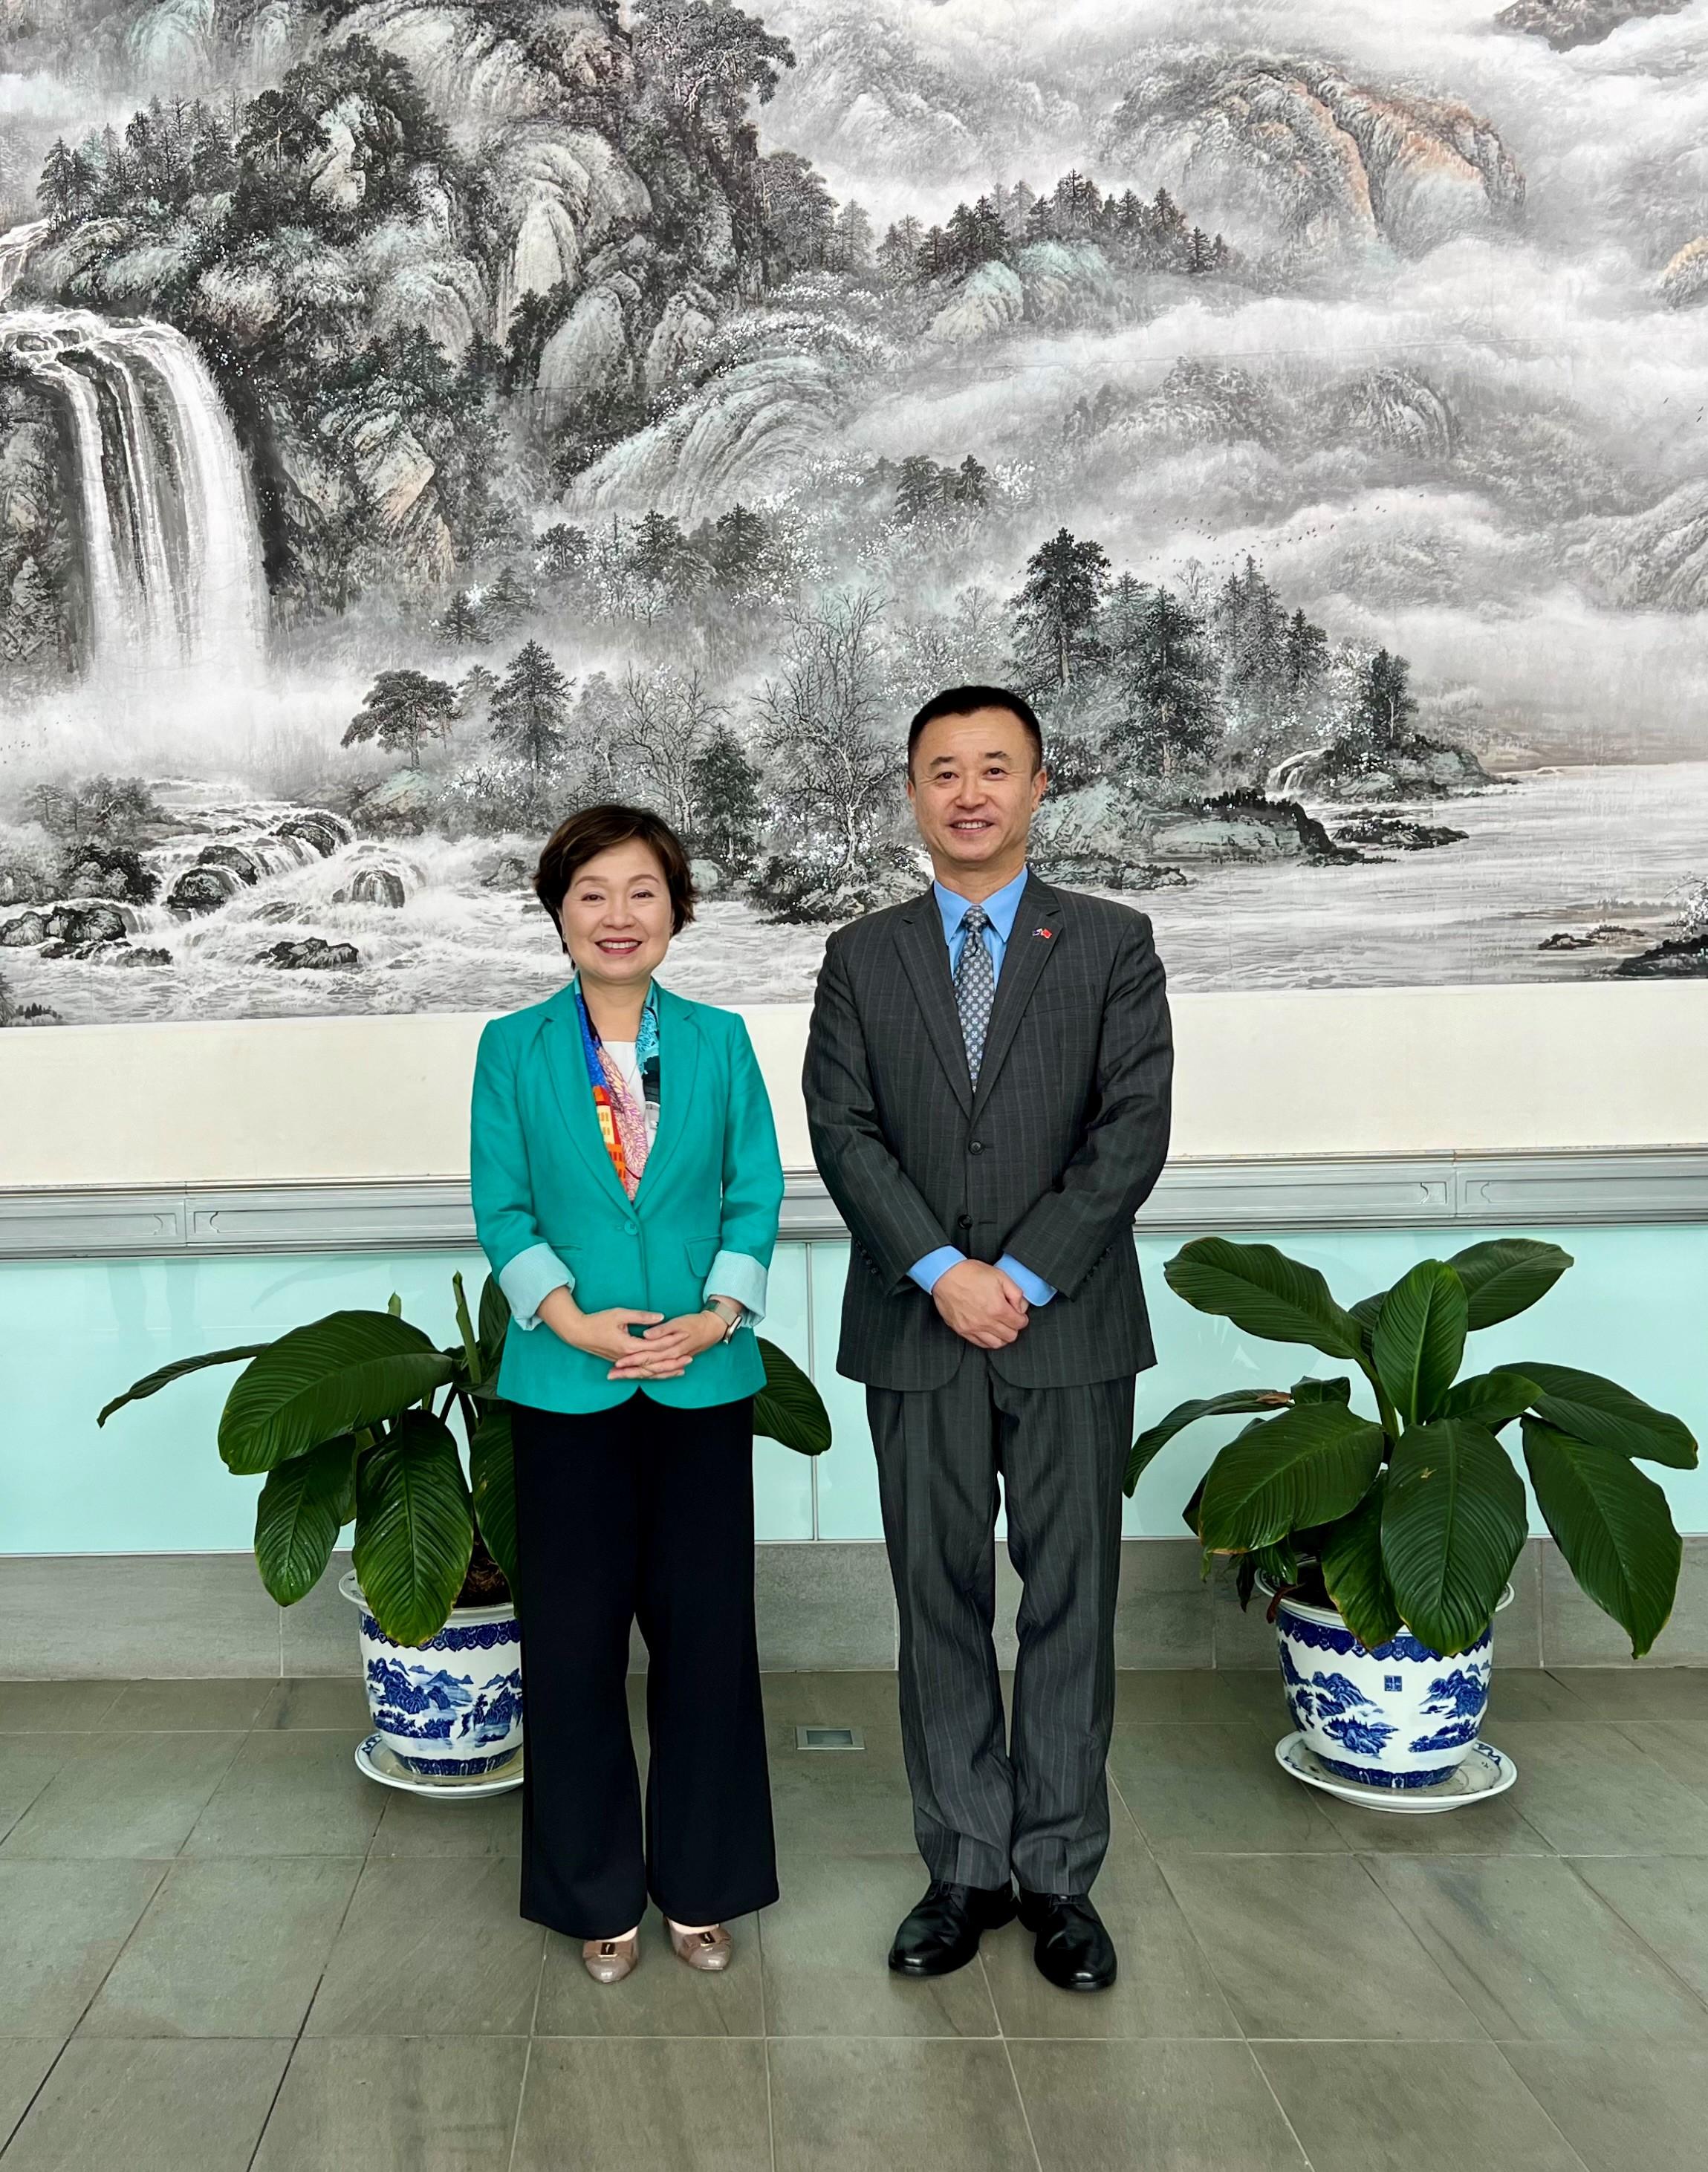 The Secretary for Education, Dr Choi Yuk-lin (left), paid a courtesy call on the Acting Consul General of the People's Republic of China in Sydney, Mr Wang Chunsheng (right), in Sydney, Australia, on March 4 (Sydney time).